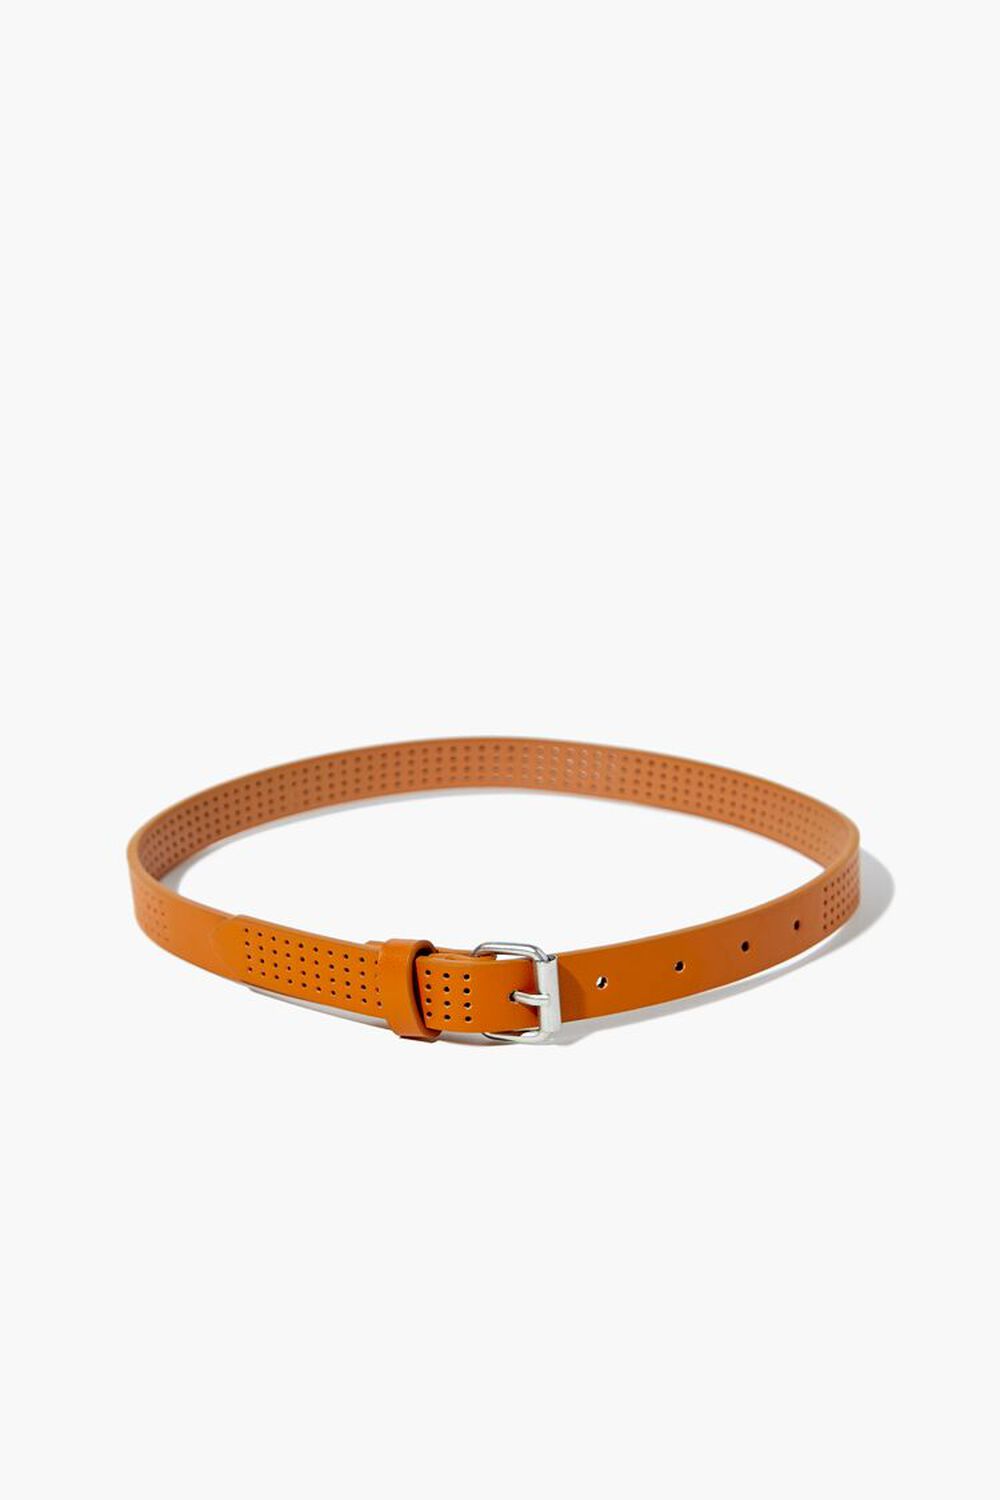 TAN Girls Perforated Faux Leather Belt (Kids), image 1